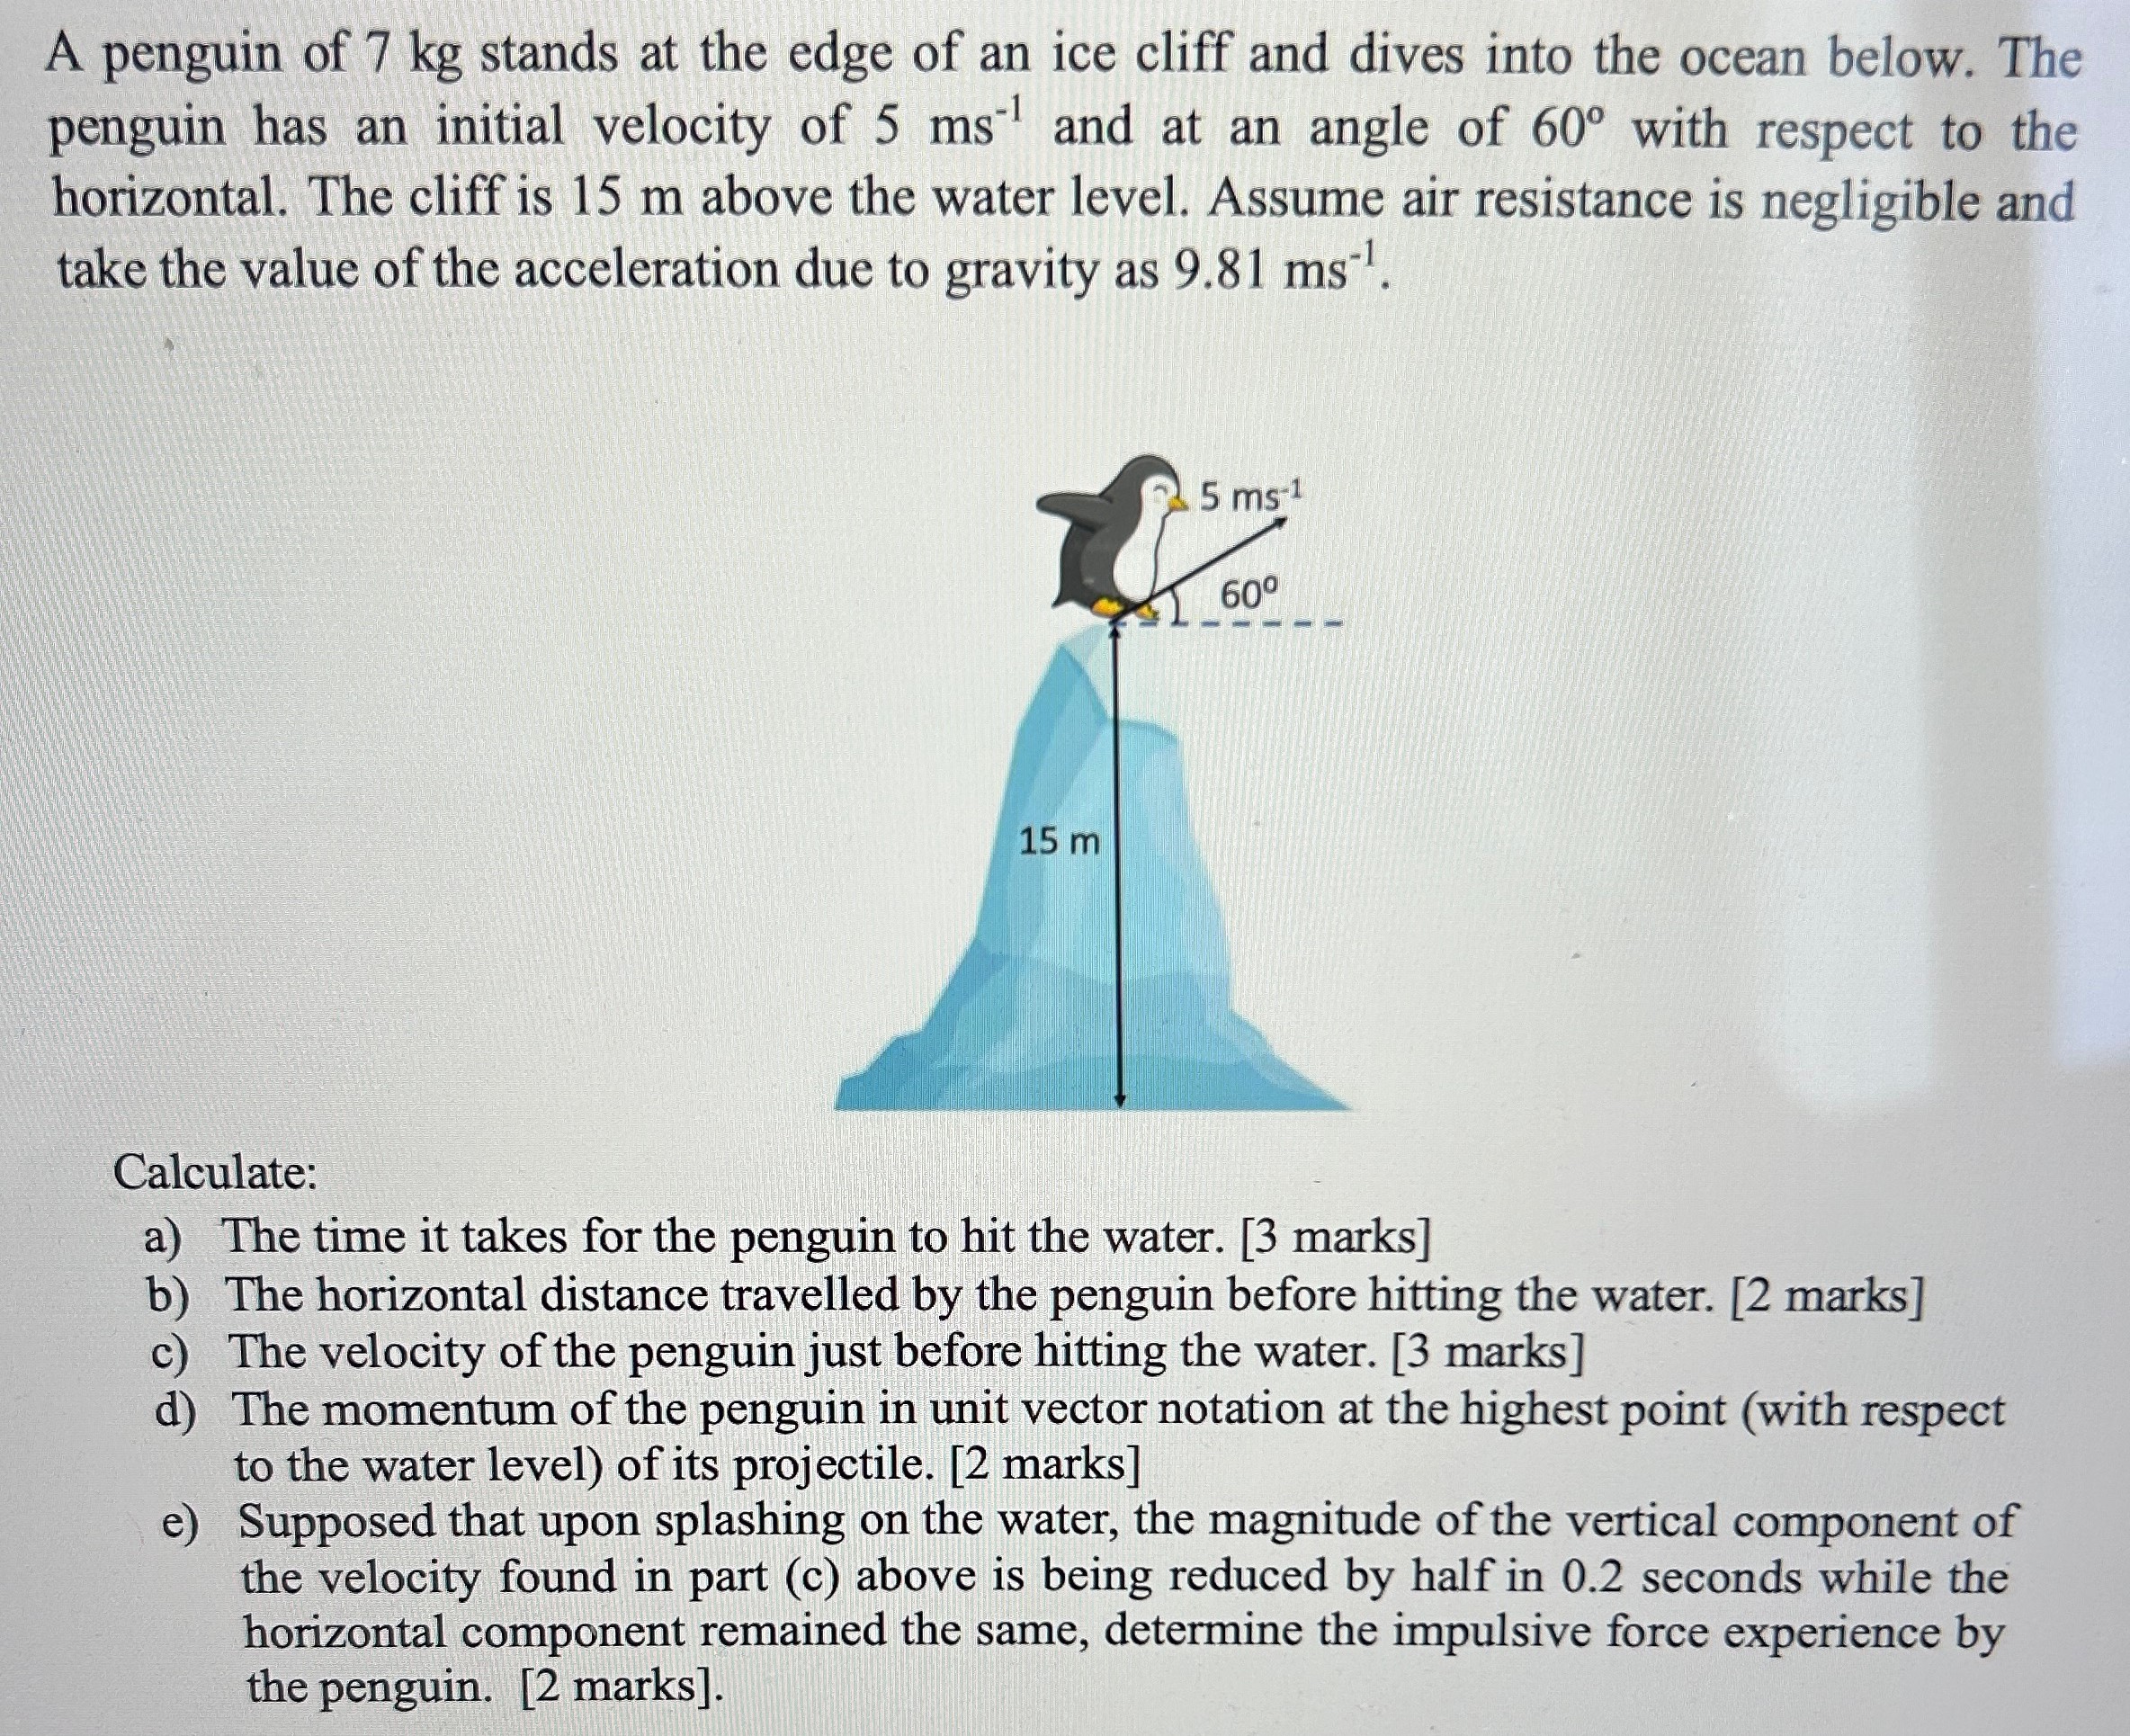 A penguin of 7 kg stands at the edge of an ice cliff and dives into the ocean below. The penguin has an initial velocity of 5 ms−1 and at an angle of 60∘ with respect to the horizontal. The cliff is 15 m above the water level. Assume air resistance is negligible and take the value of the acceleration due to gravity as 9.81 ms−1. Calculate: a) The time it takes for the penguin to hit the water. [3 marks] b) The horizontal distance travelled by the penguin before hitting the water. [2 marks] c) The velocity of the penguin just before hitting the water. [3 marks] d) The momentum of the penguin in unit vector notation at the highest point (with respect to the water level) of its projectile. [2 marks] e) Supposed that upon splashing on the water, the magnitude of the vertical component of the velocity found in part (c) above is being reduced by half in 0.2 seconds while the horizontal component remained the same, determine the impulsive force experience by the penguin. [2 marks].